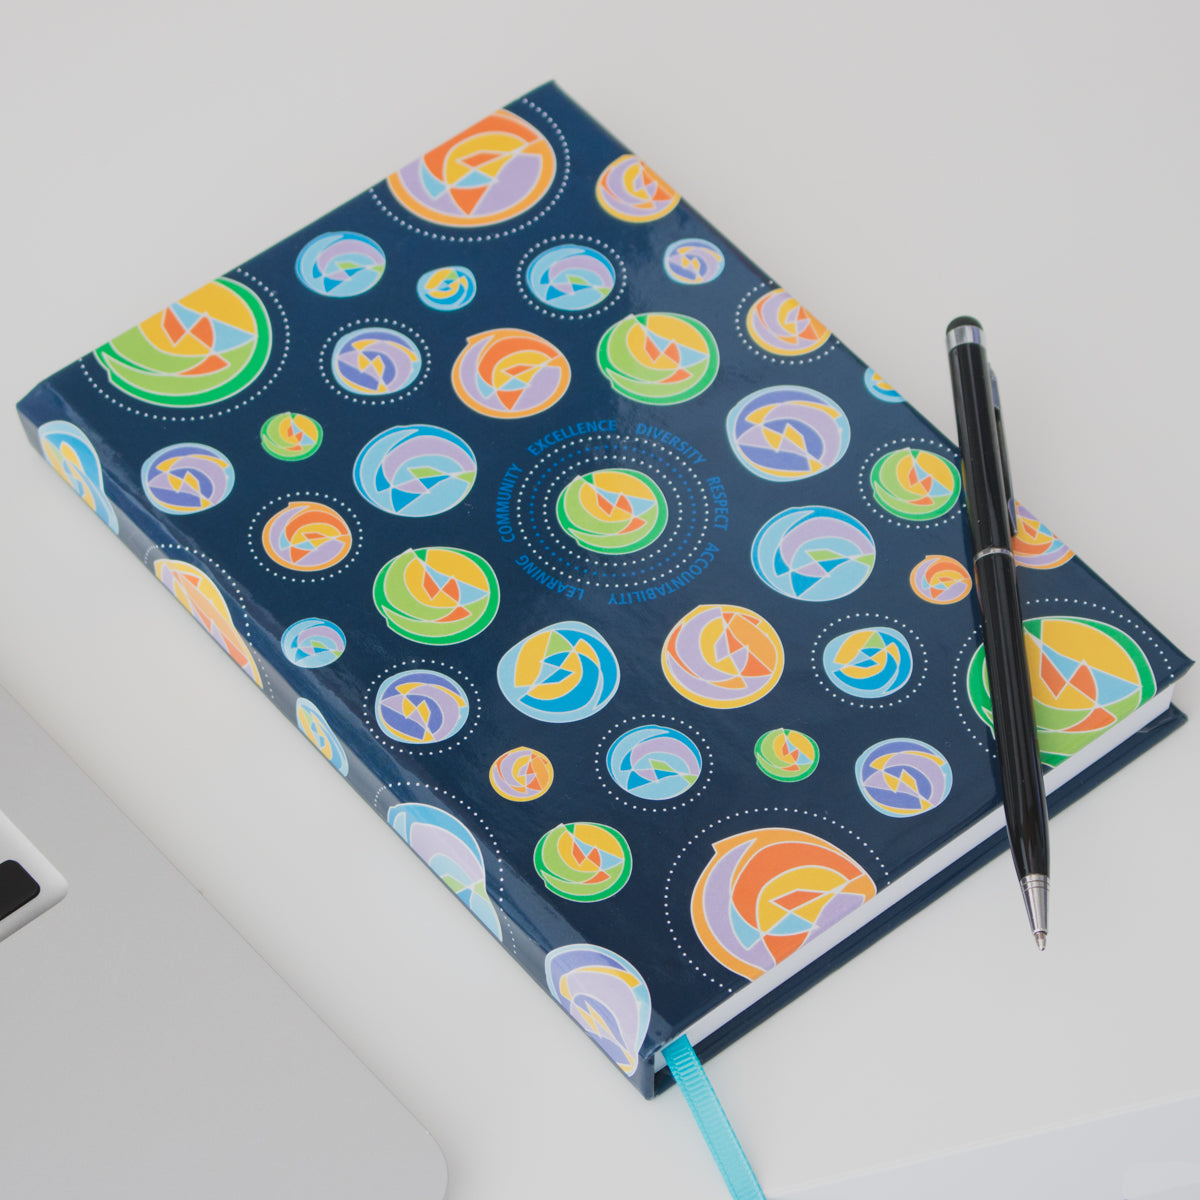 close up of 5.25" x 7.25" hardcover navy notebook with multicolour circular design pattern featuring shades of green, purple, blue, yellow and black george brown college pen